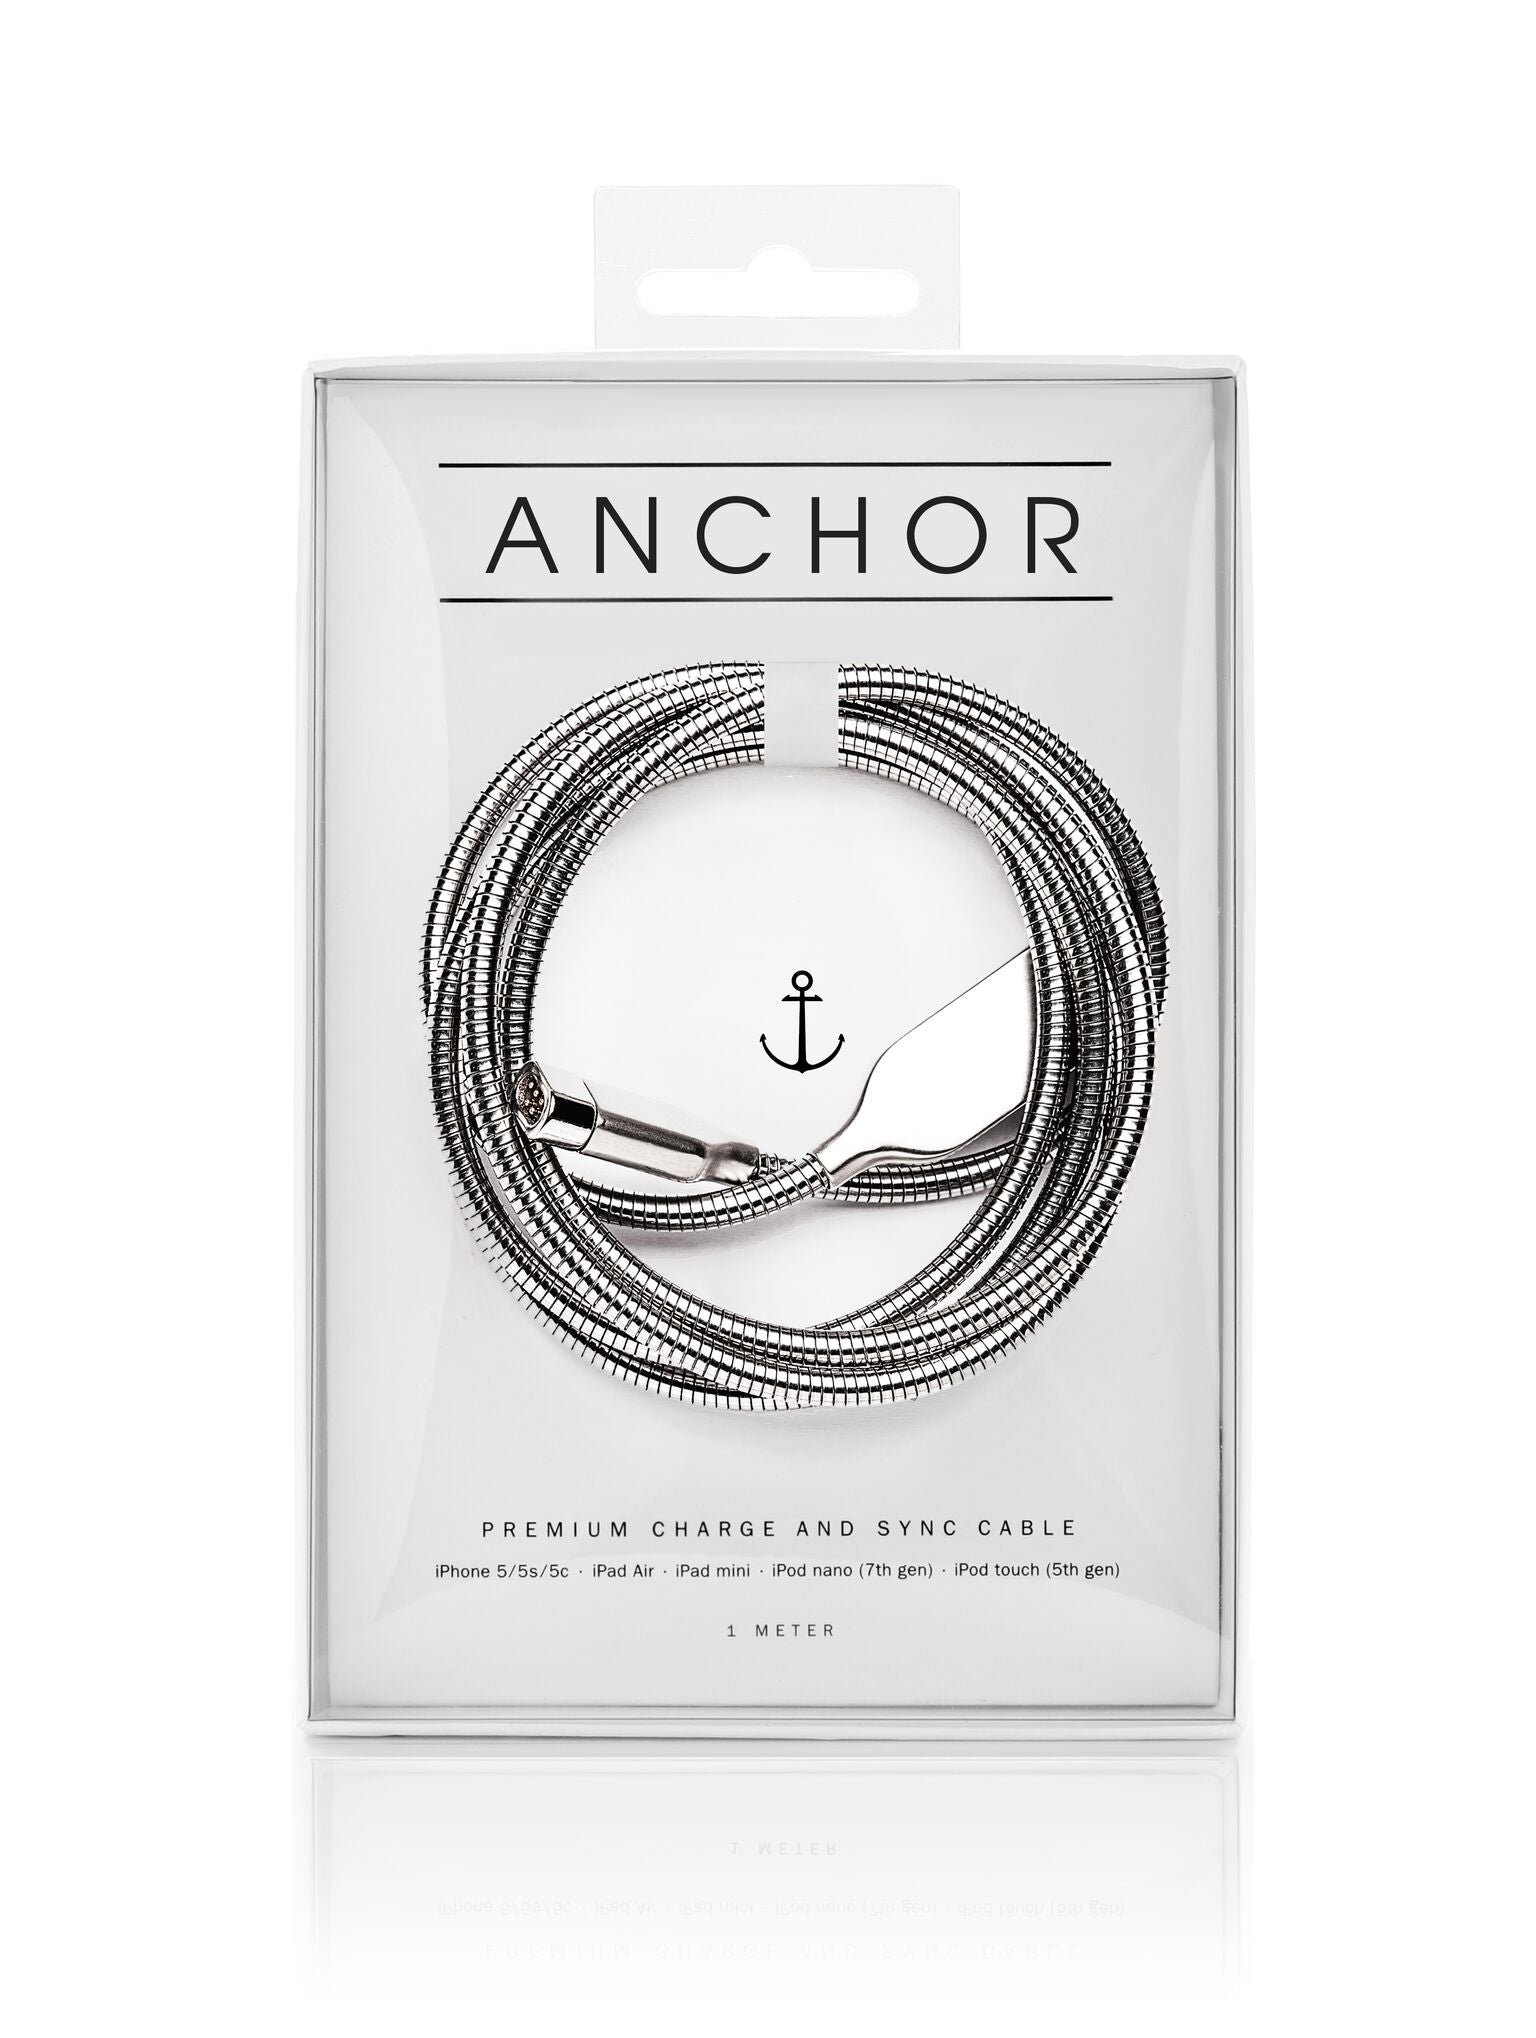 The Anchor Cable box - This one ingenious magnetic cable will charge all of your mobile devices